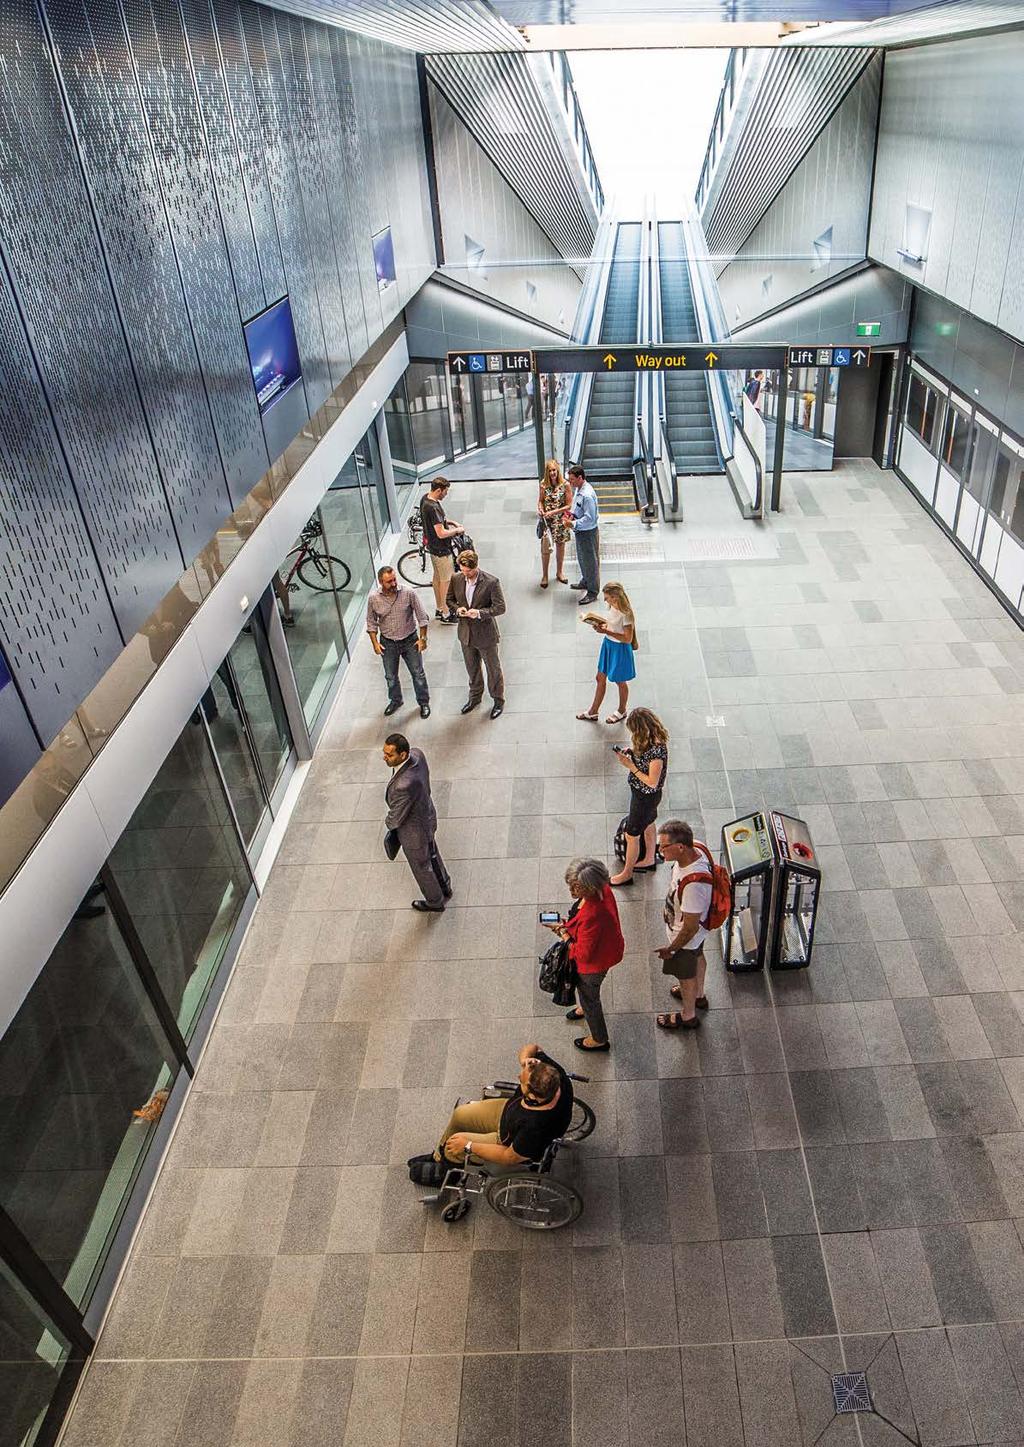 It links Rouse Hill in the North West to Chatswood with 13 metro stations and 4000 commuter car spaces.